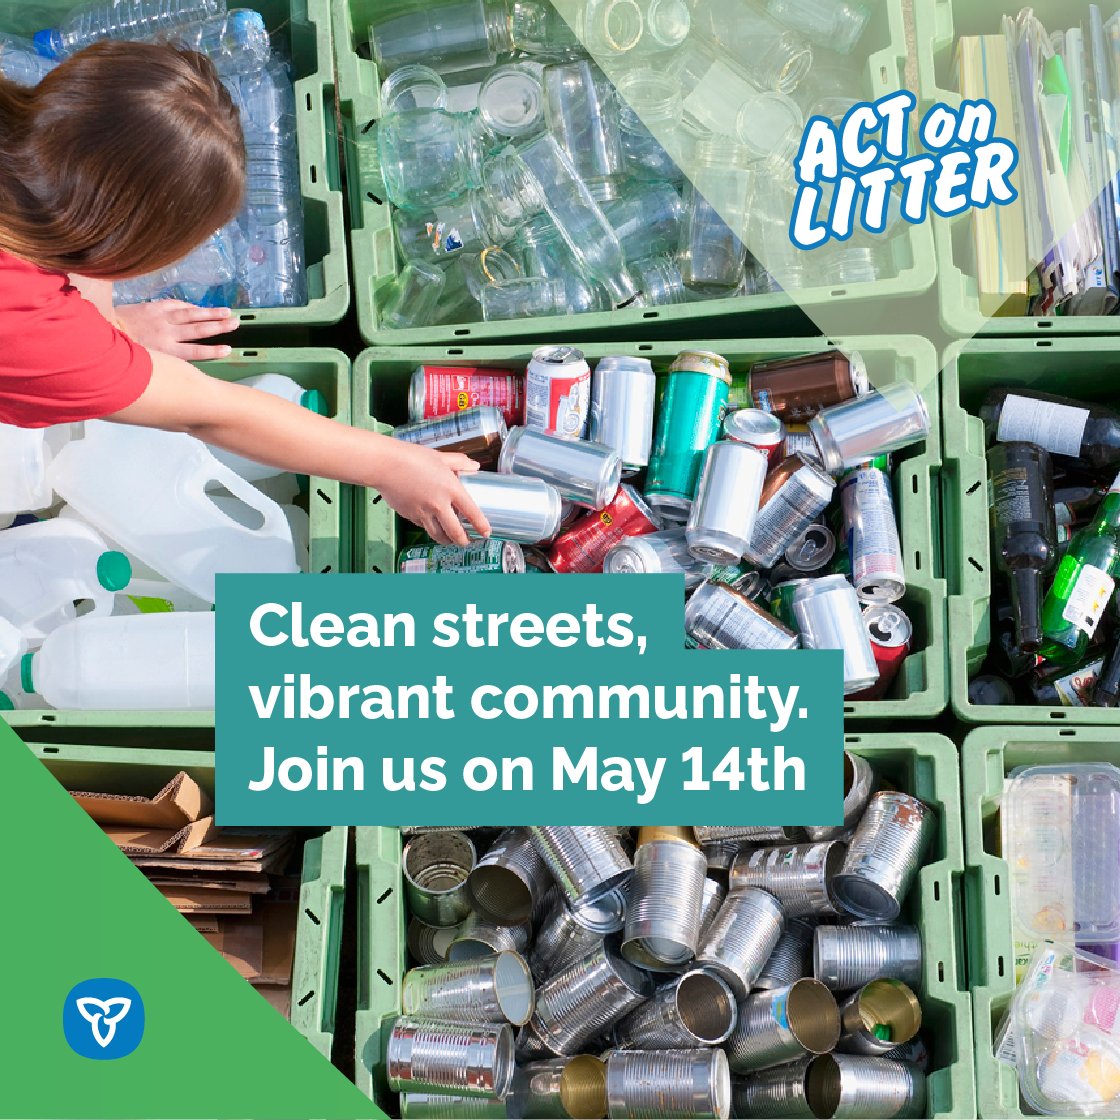 Local businesses: join us on May 14 for Ontario’s Day of Action on Litter! Let's unite for a cleanup, keeping our streets inviting. Showcase your commitment to community and the environment. Access our Litter Cleanup Guide here: ontario.ca/page/litter-cl…